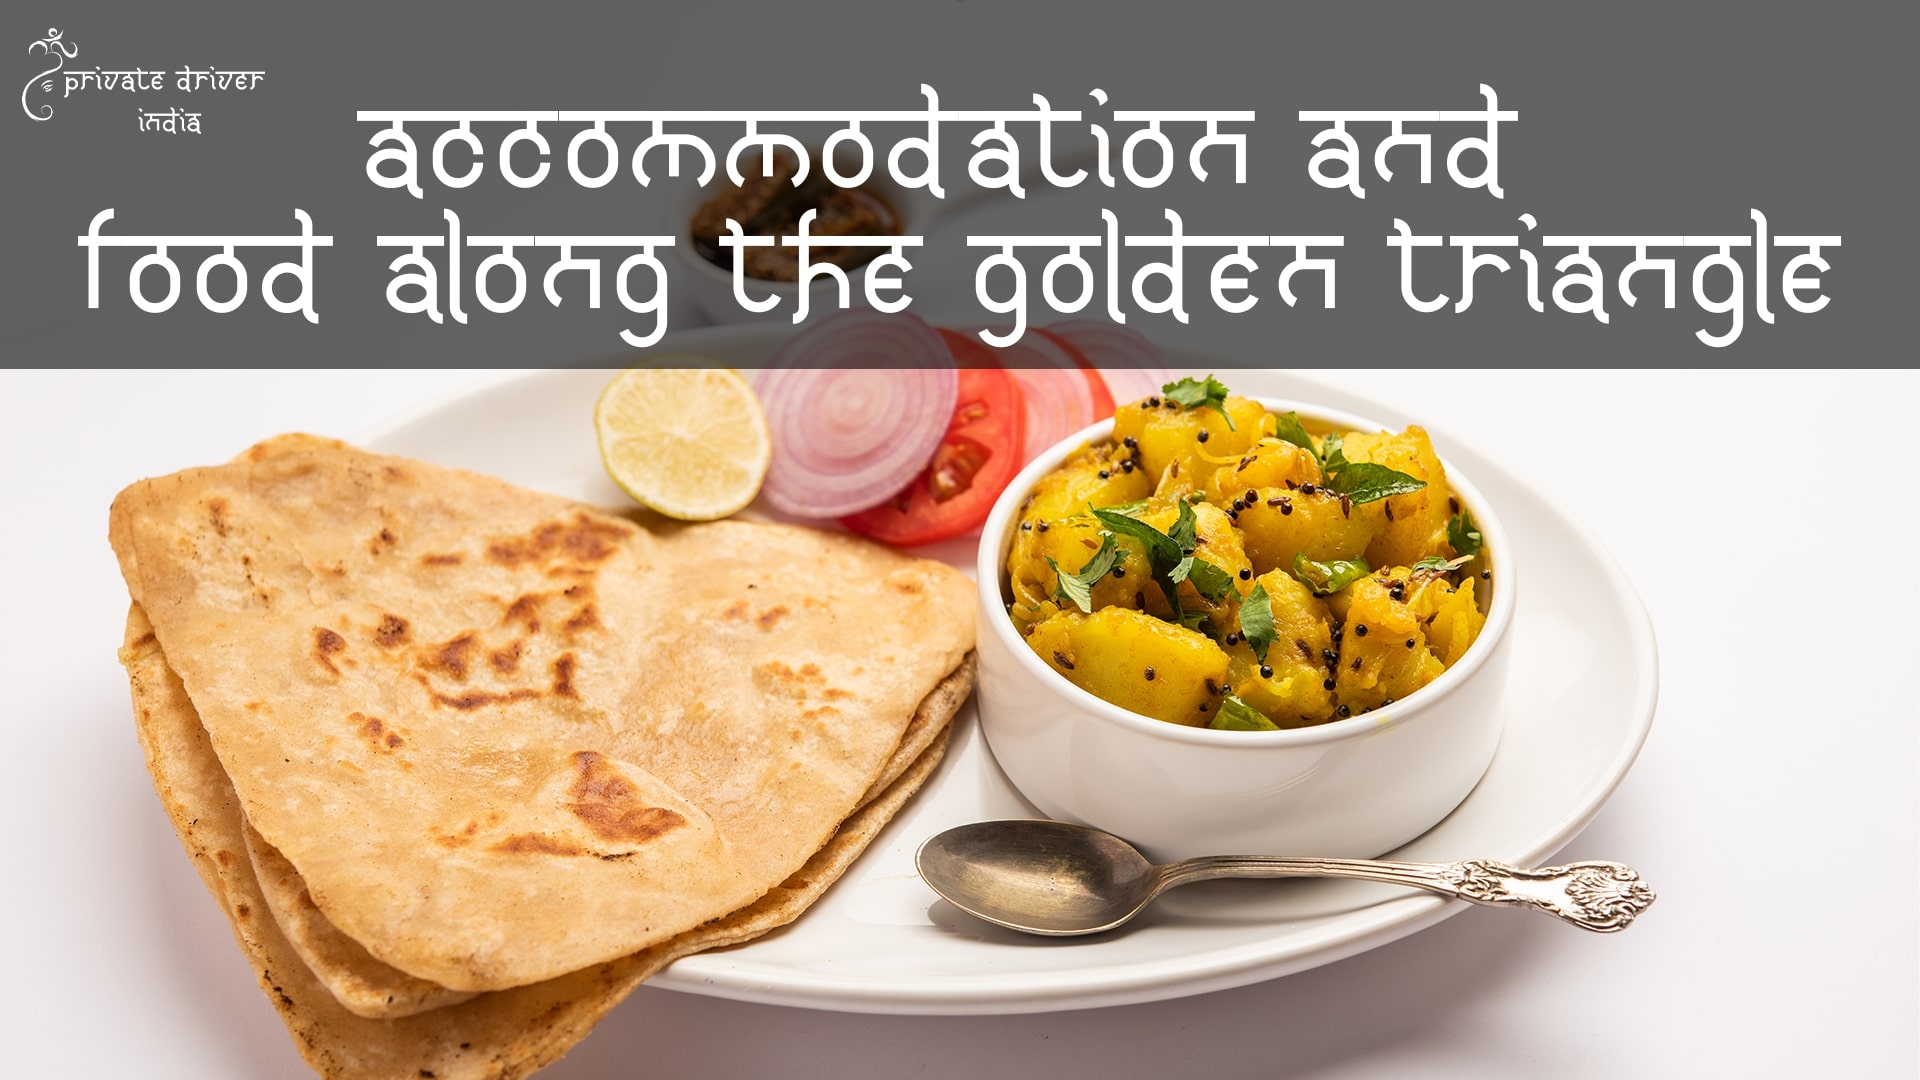 Accommodation and Food Along the Golden Triangle